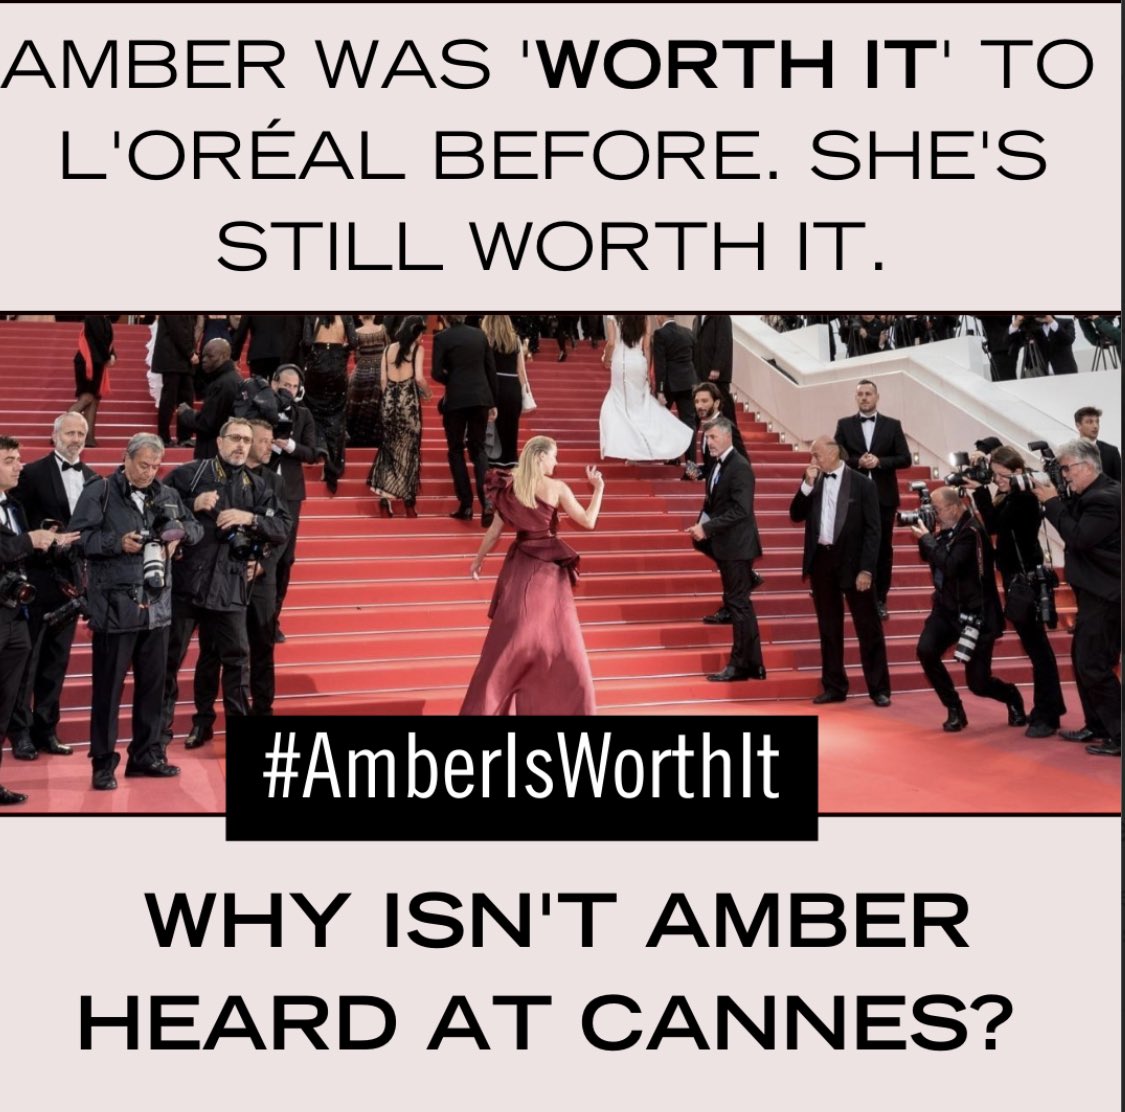 Amber Heard deserves to keep working and be a part of @LOrealParisUSA at #Cannes. Just shows powerful men have no consequences.
#AmberIsWorthIt #WorthIt #HireSurvivors